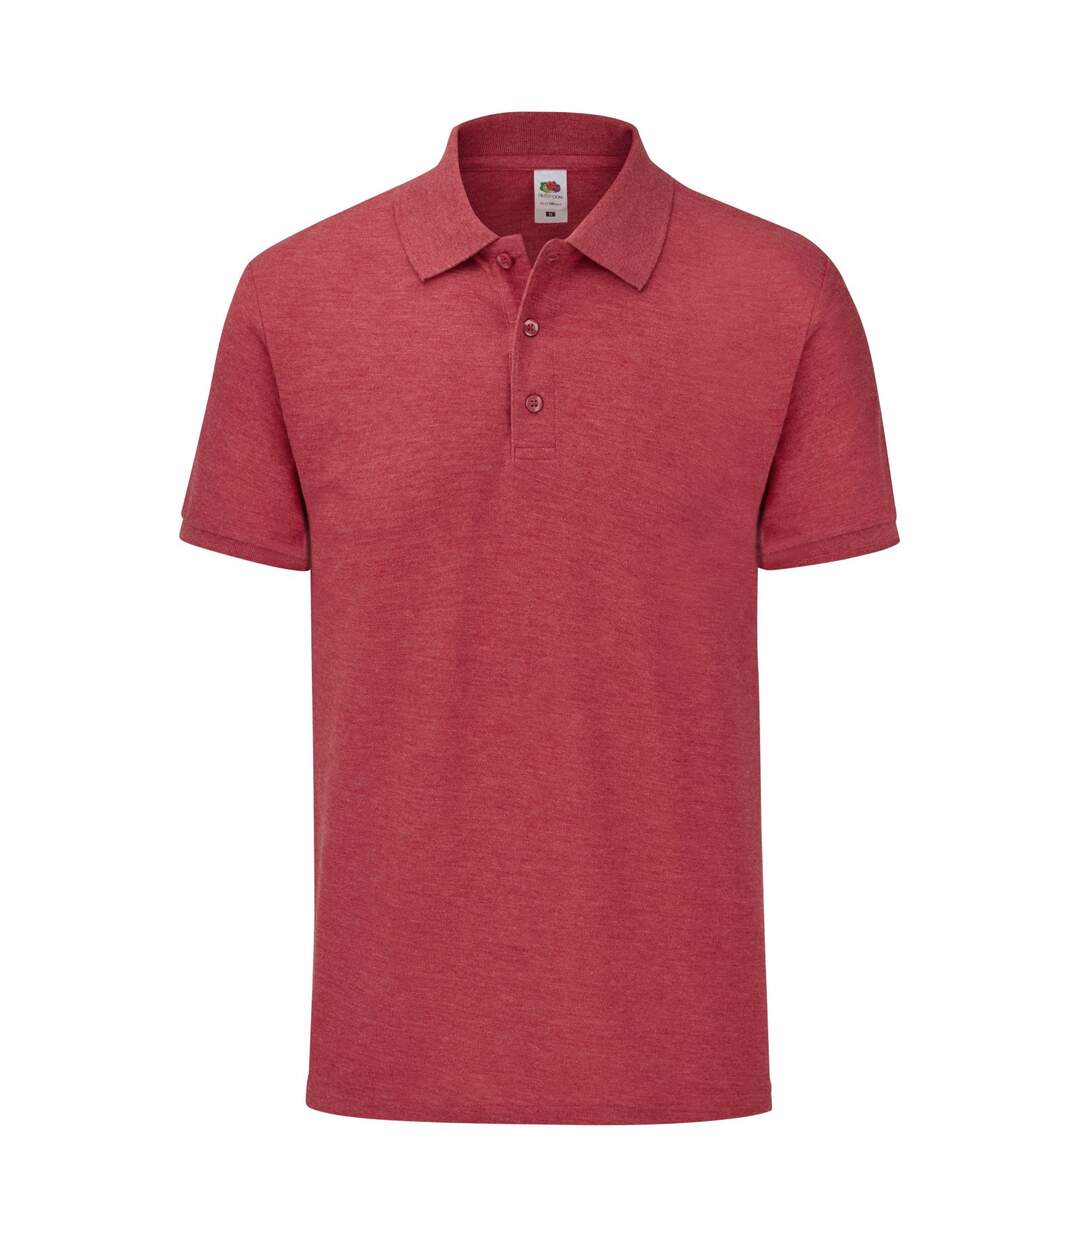 Fruit of the Loom Mens Tailored Polo Shirt (Red Heather) - UTBC4757